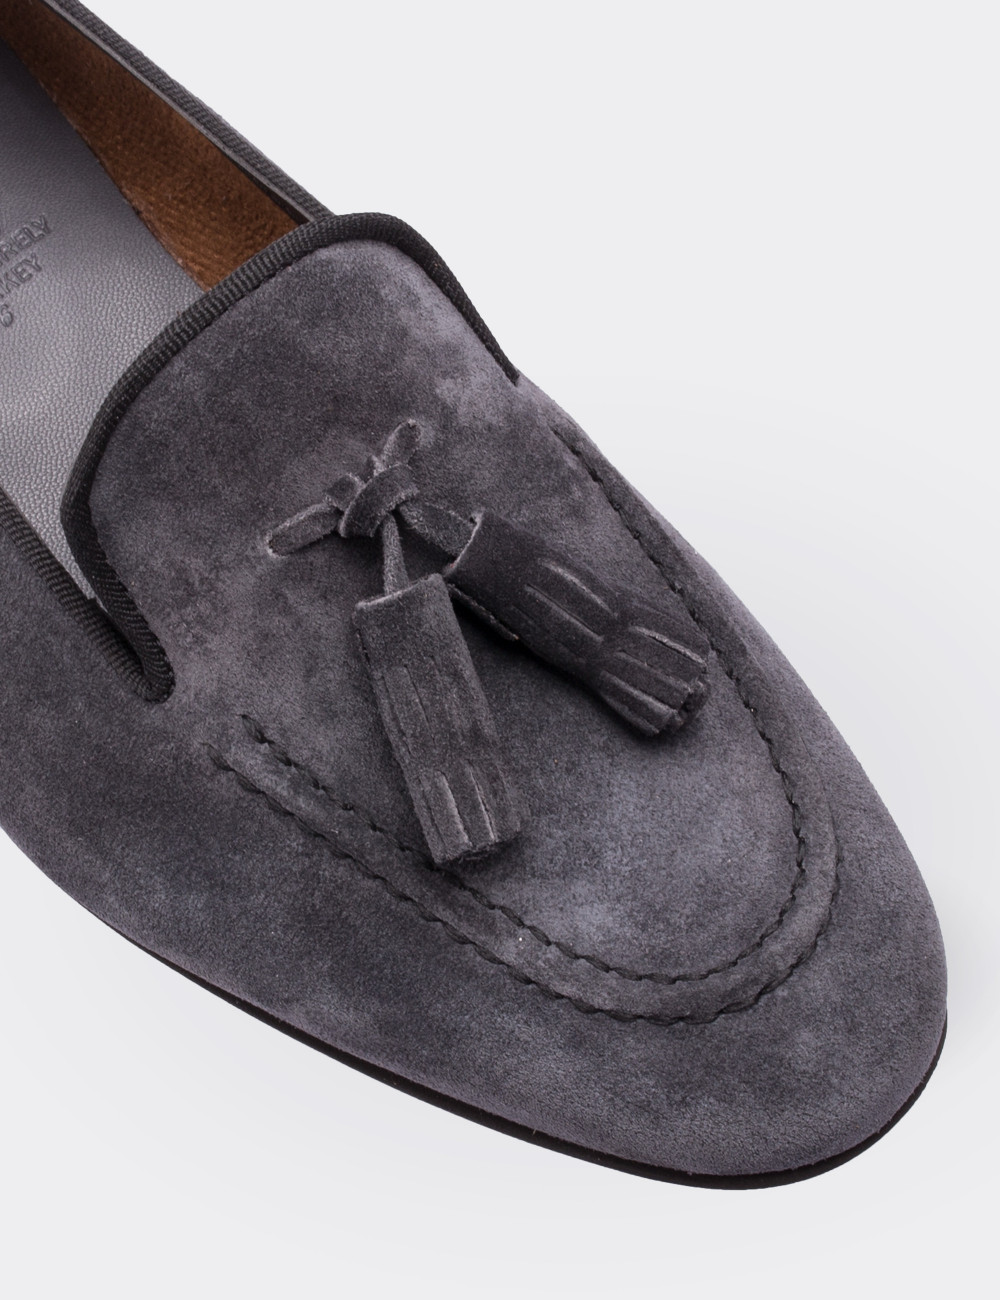 Gray Suede Leather Loafers - 01619ZGRIM01